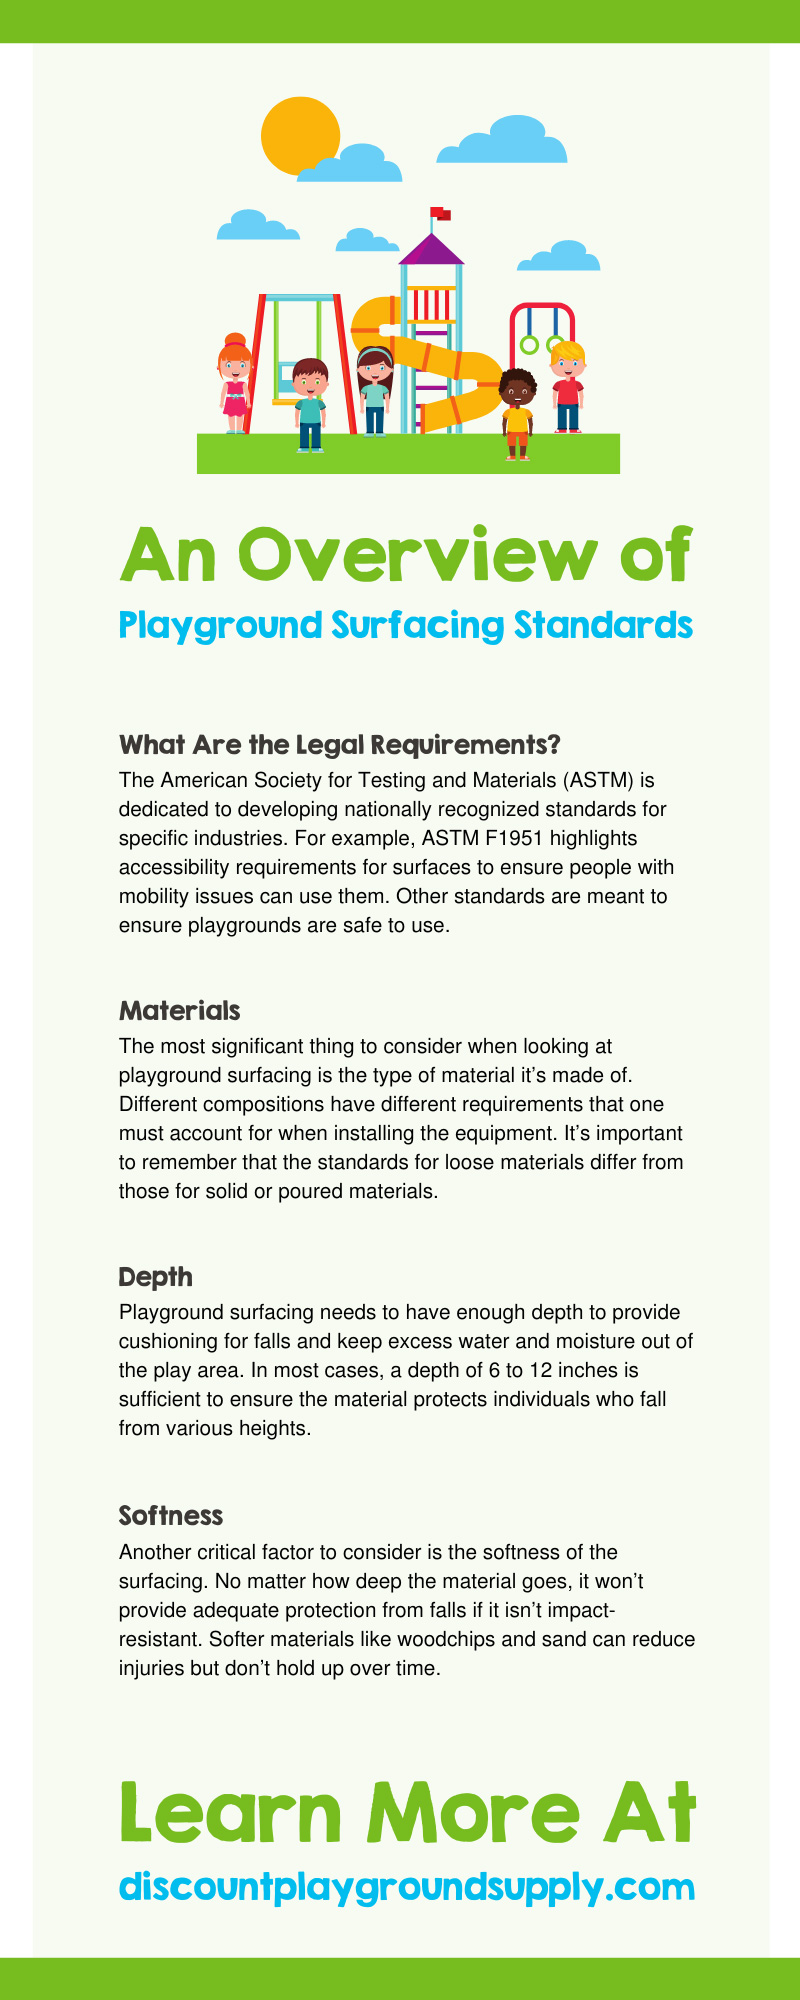 An Overview of Playground Surfacing Standards